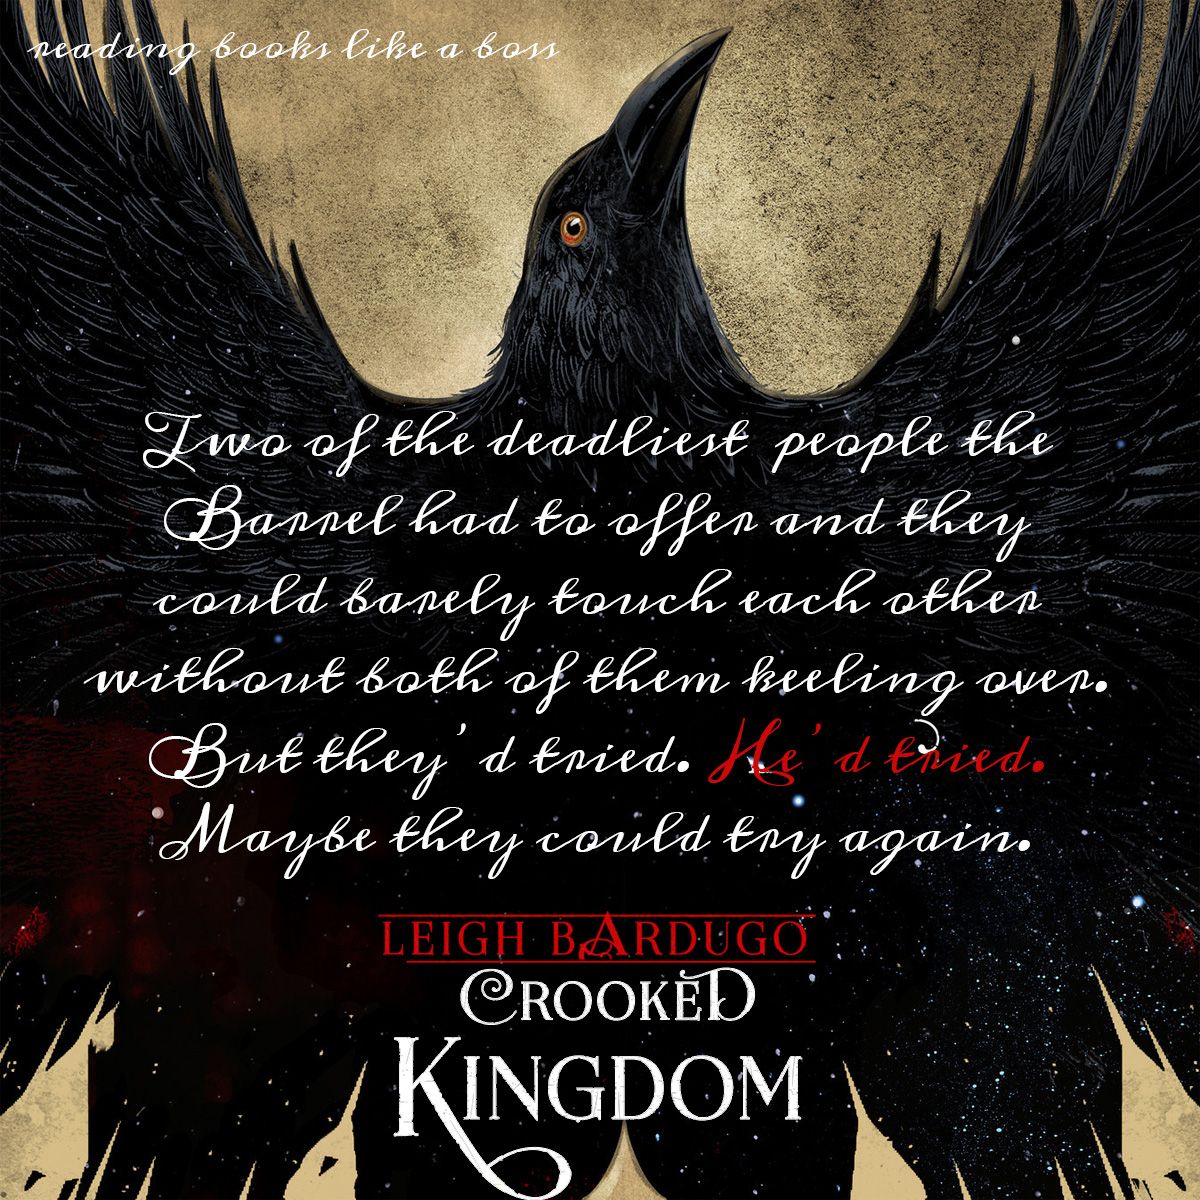 Book Review Kingdom by Leigh Bardugo. Reading Books